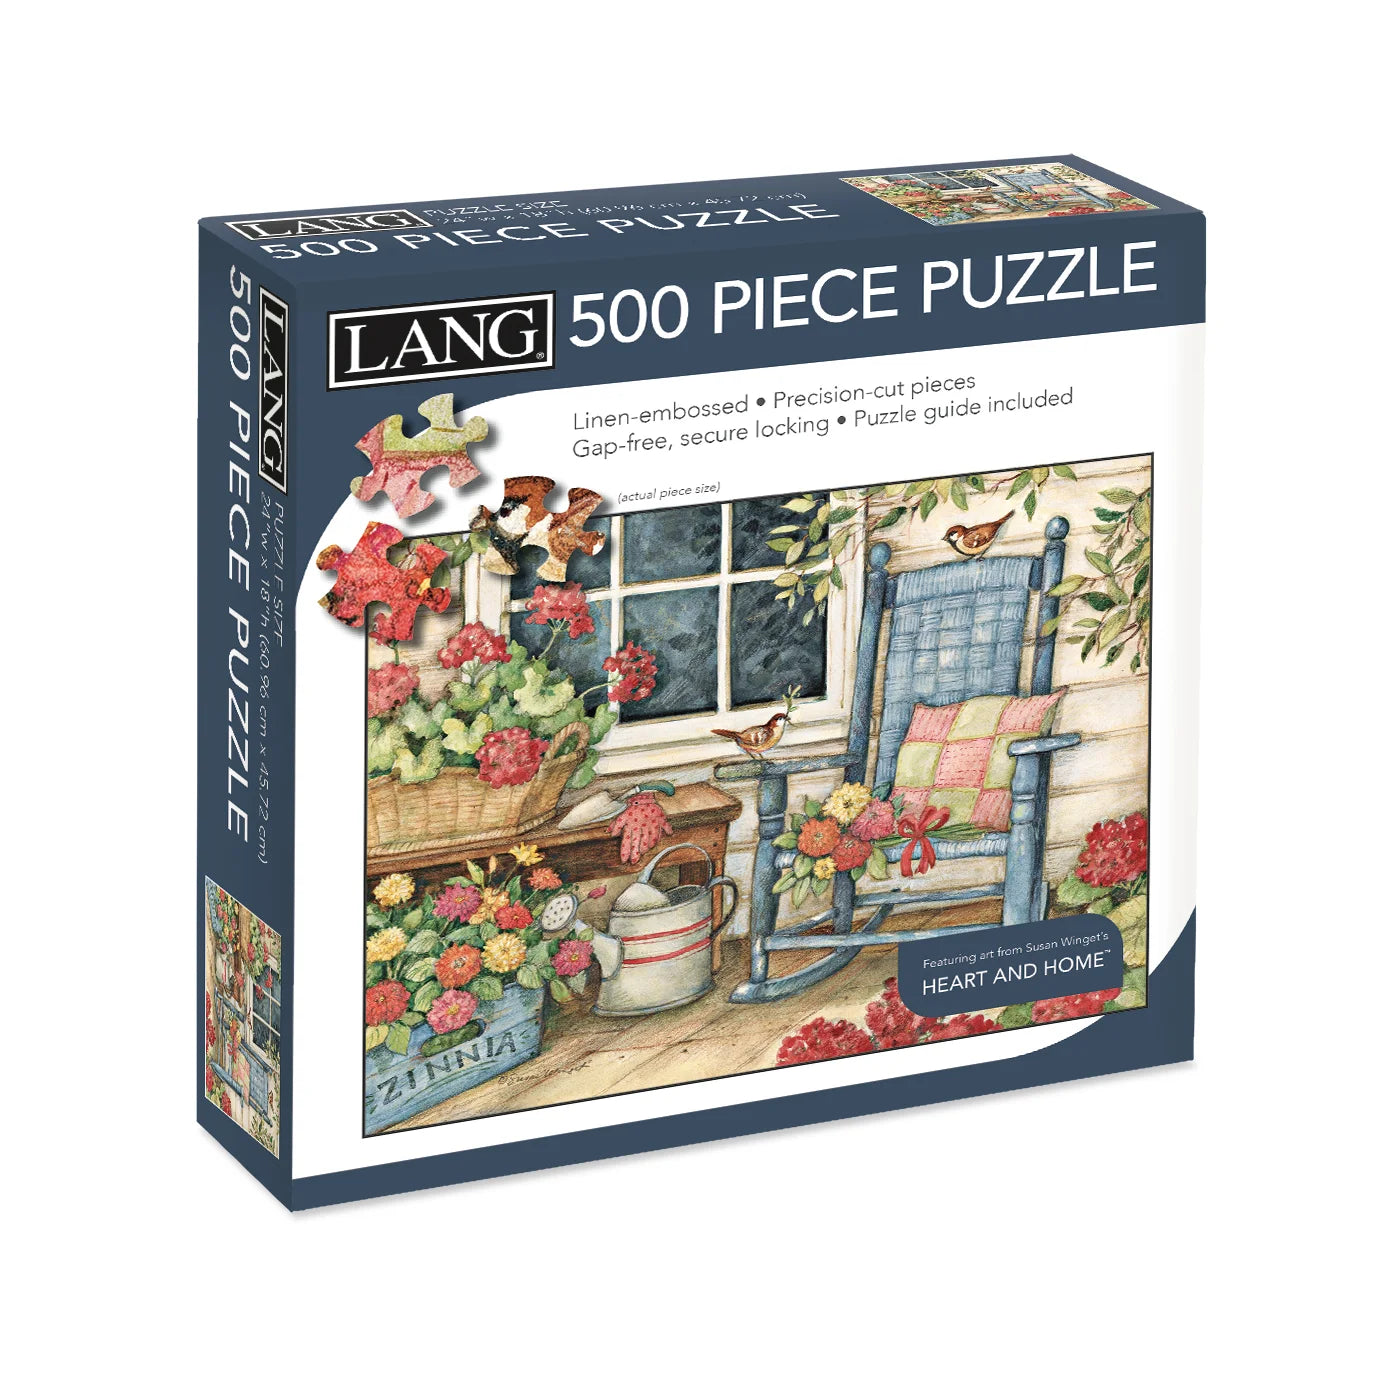 LANG Rocking Chair - 500pc Jigsaw Puzzle